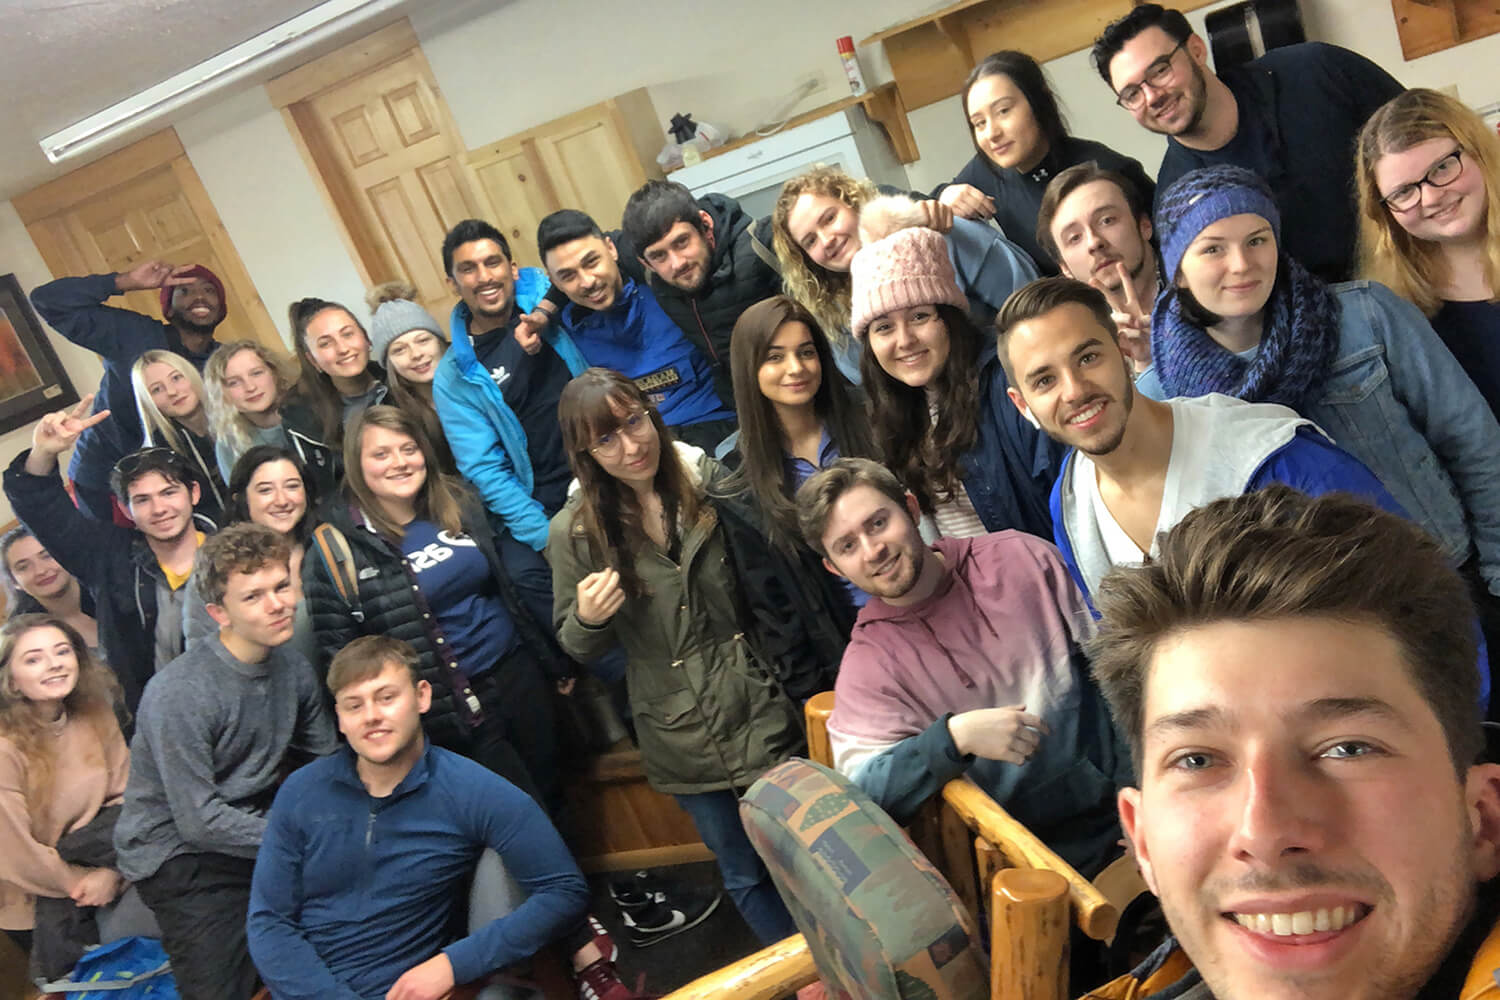 16 Edge Hill students and 11 international students from a partner university pose for a group photo during the trip of a lifetime to Yellowstone National Park.